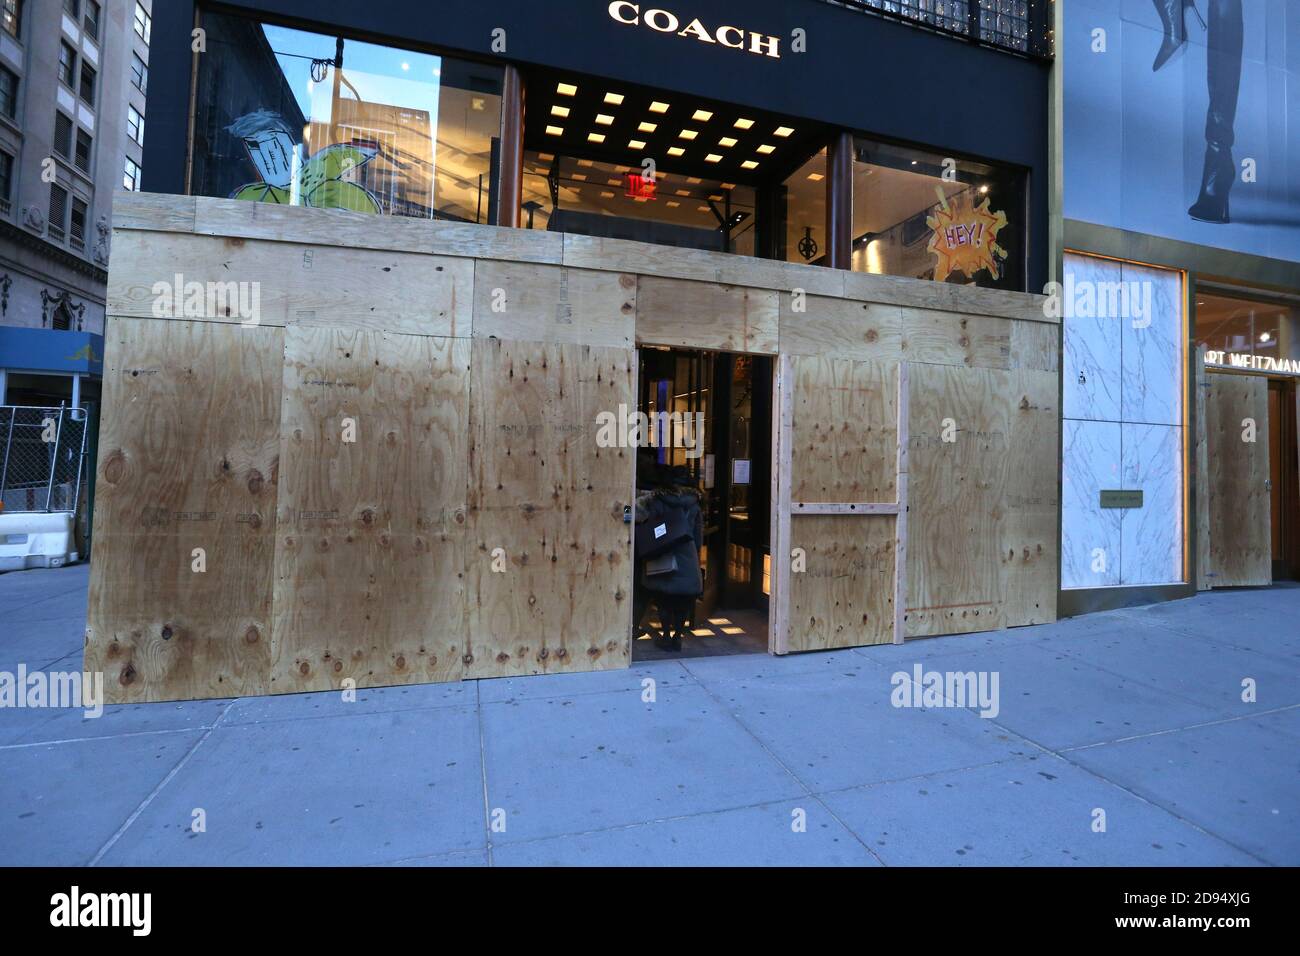 New York, NY, USA. 2nd Nov, 2020. Nov 2, 2020 : New York Stores prepare for possible unrest surrounding election day. The Coach Store on 5th Avenue is boarded up, Credit: Dan Herrick/ZUMA Wire/Alamy Live News Stock Photo